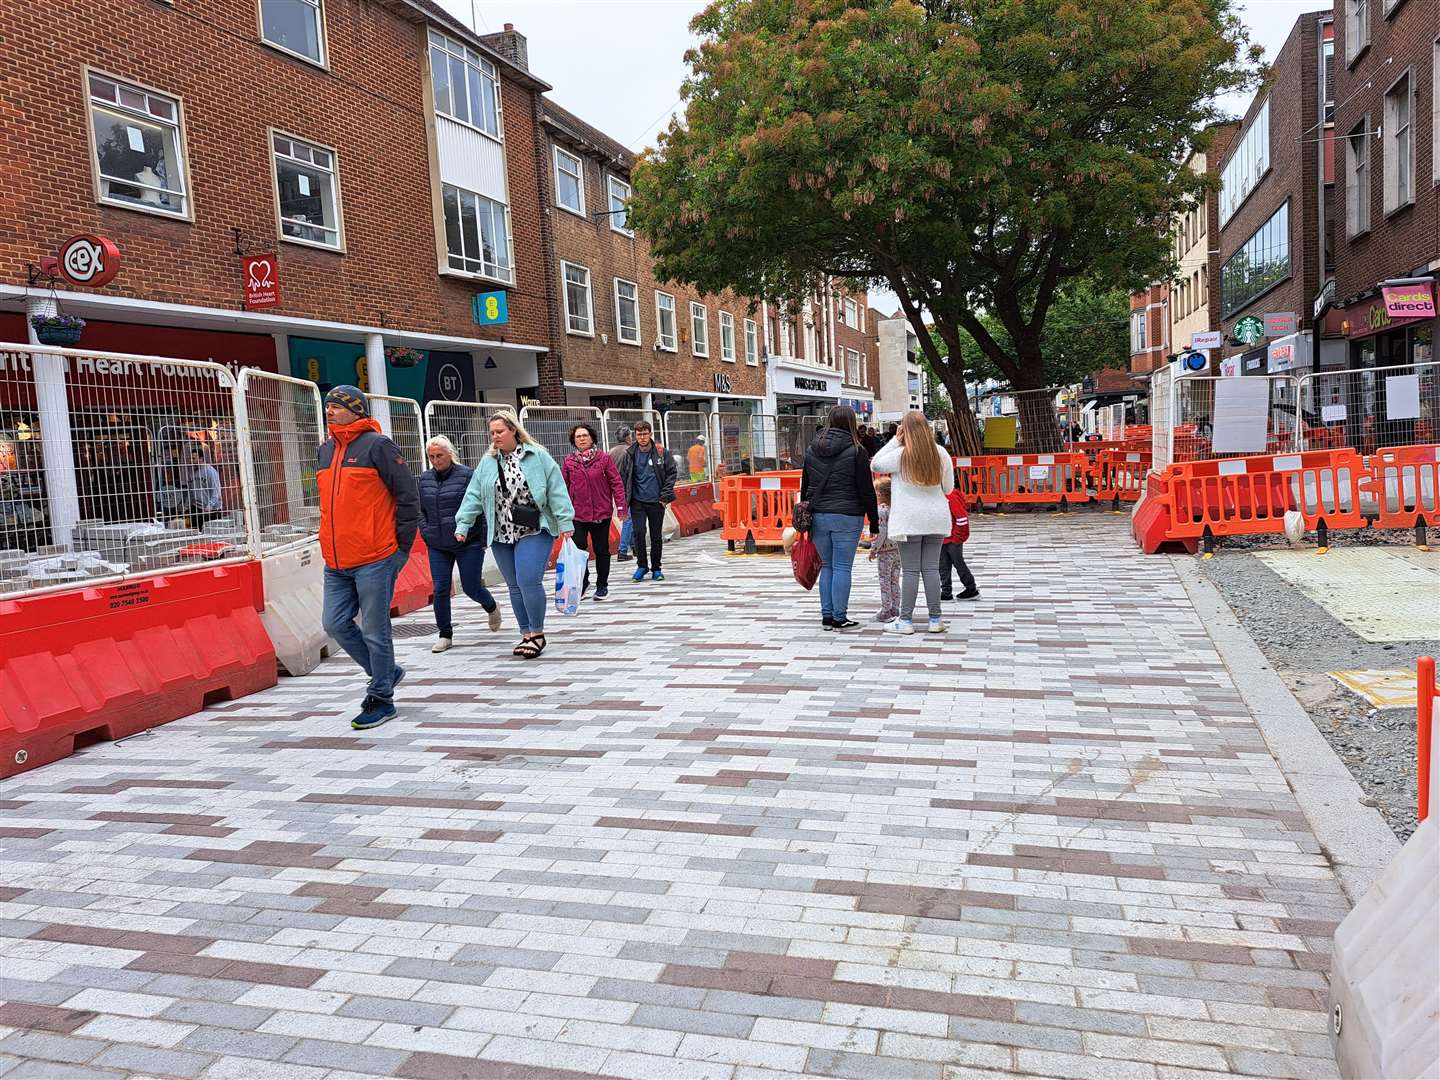 Although not yet complete, some residents fear the newly upgraded section of the high street will be out of keeping with the historic city